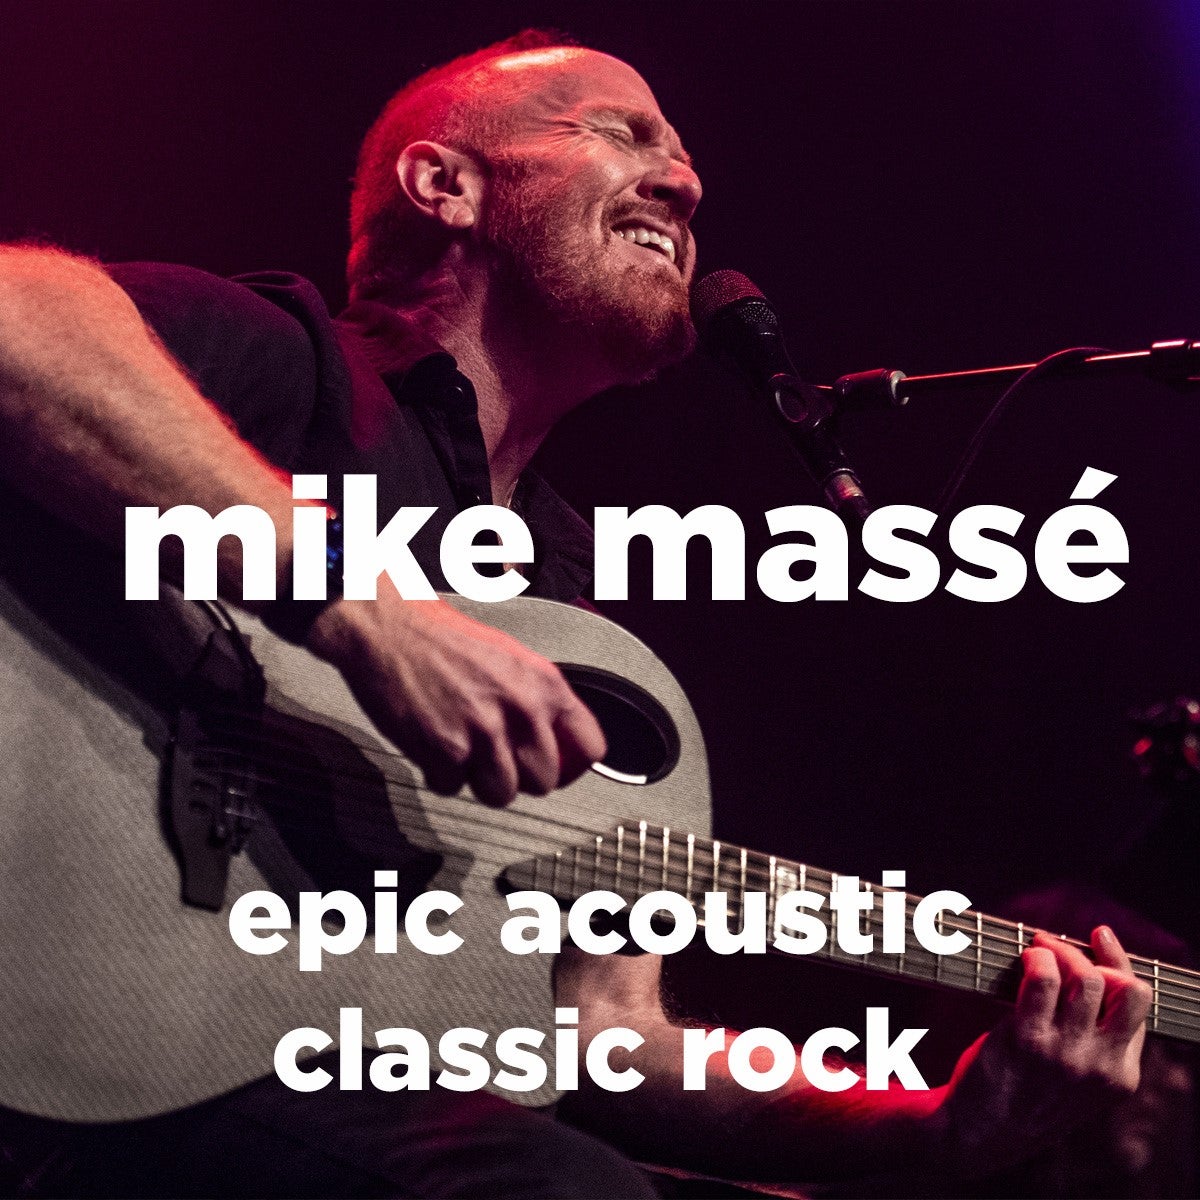 Mike Masse in Concert - Epic Acoustic Classic Rock